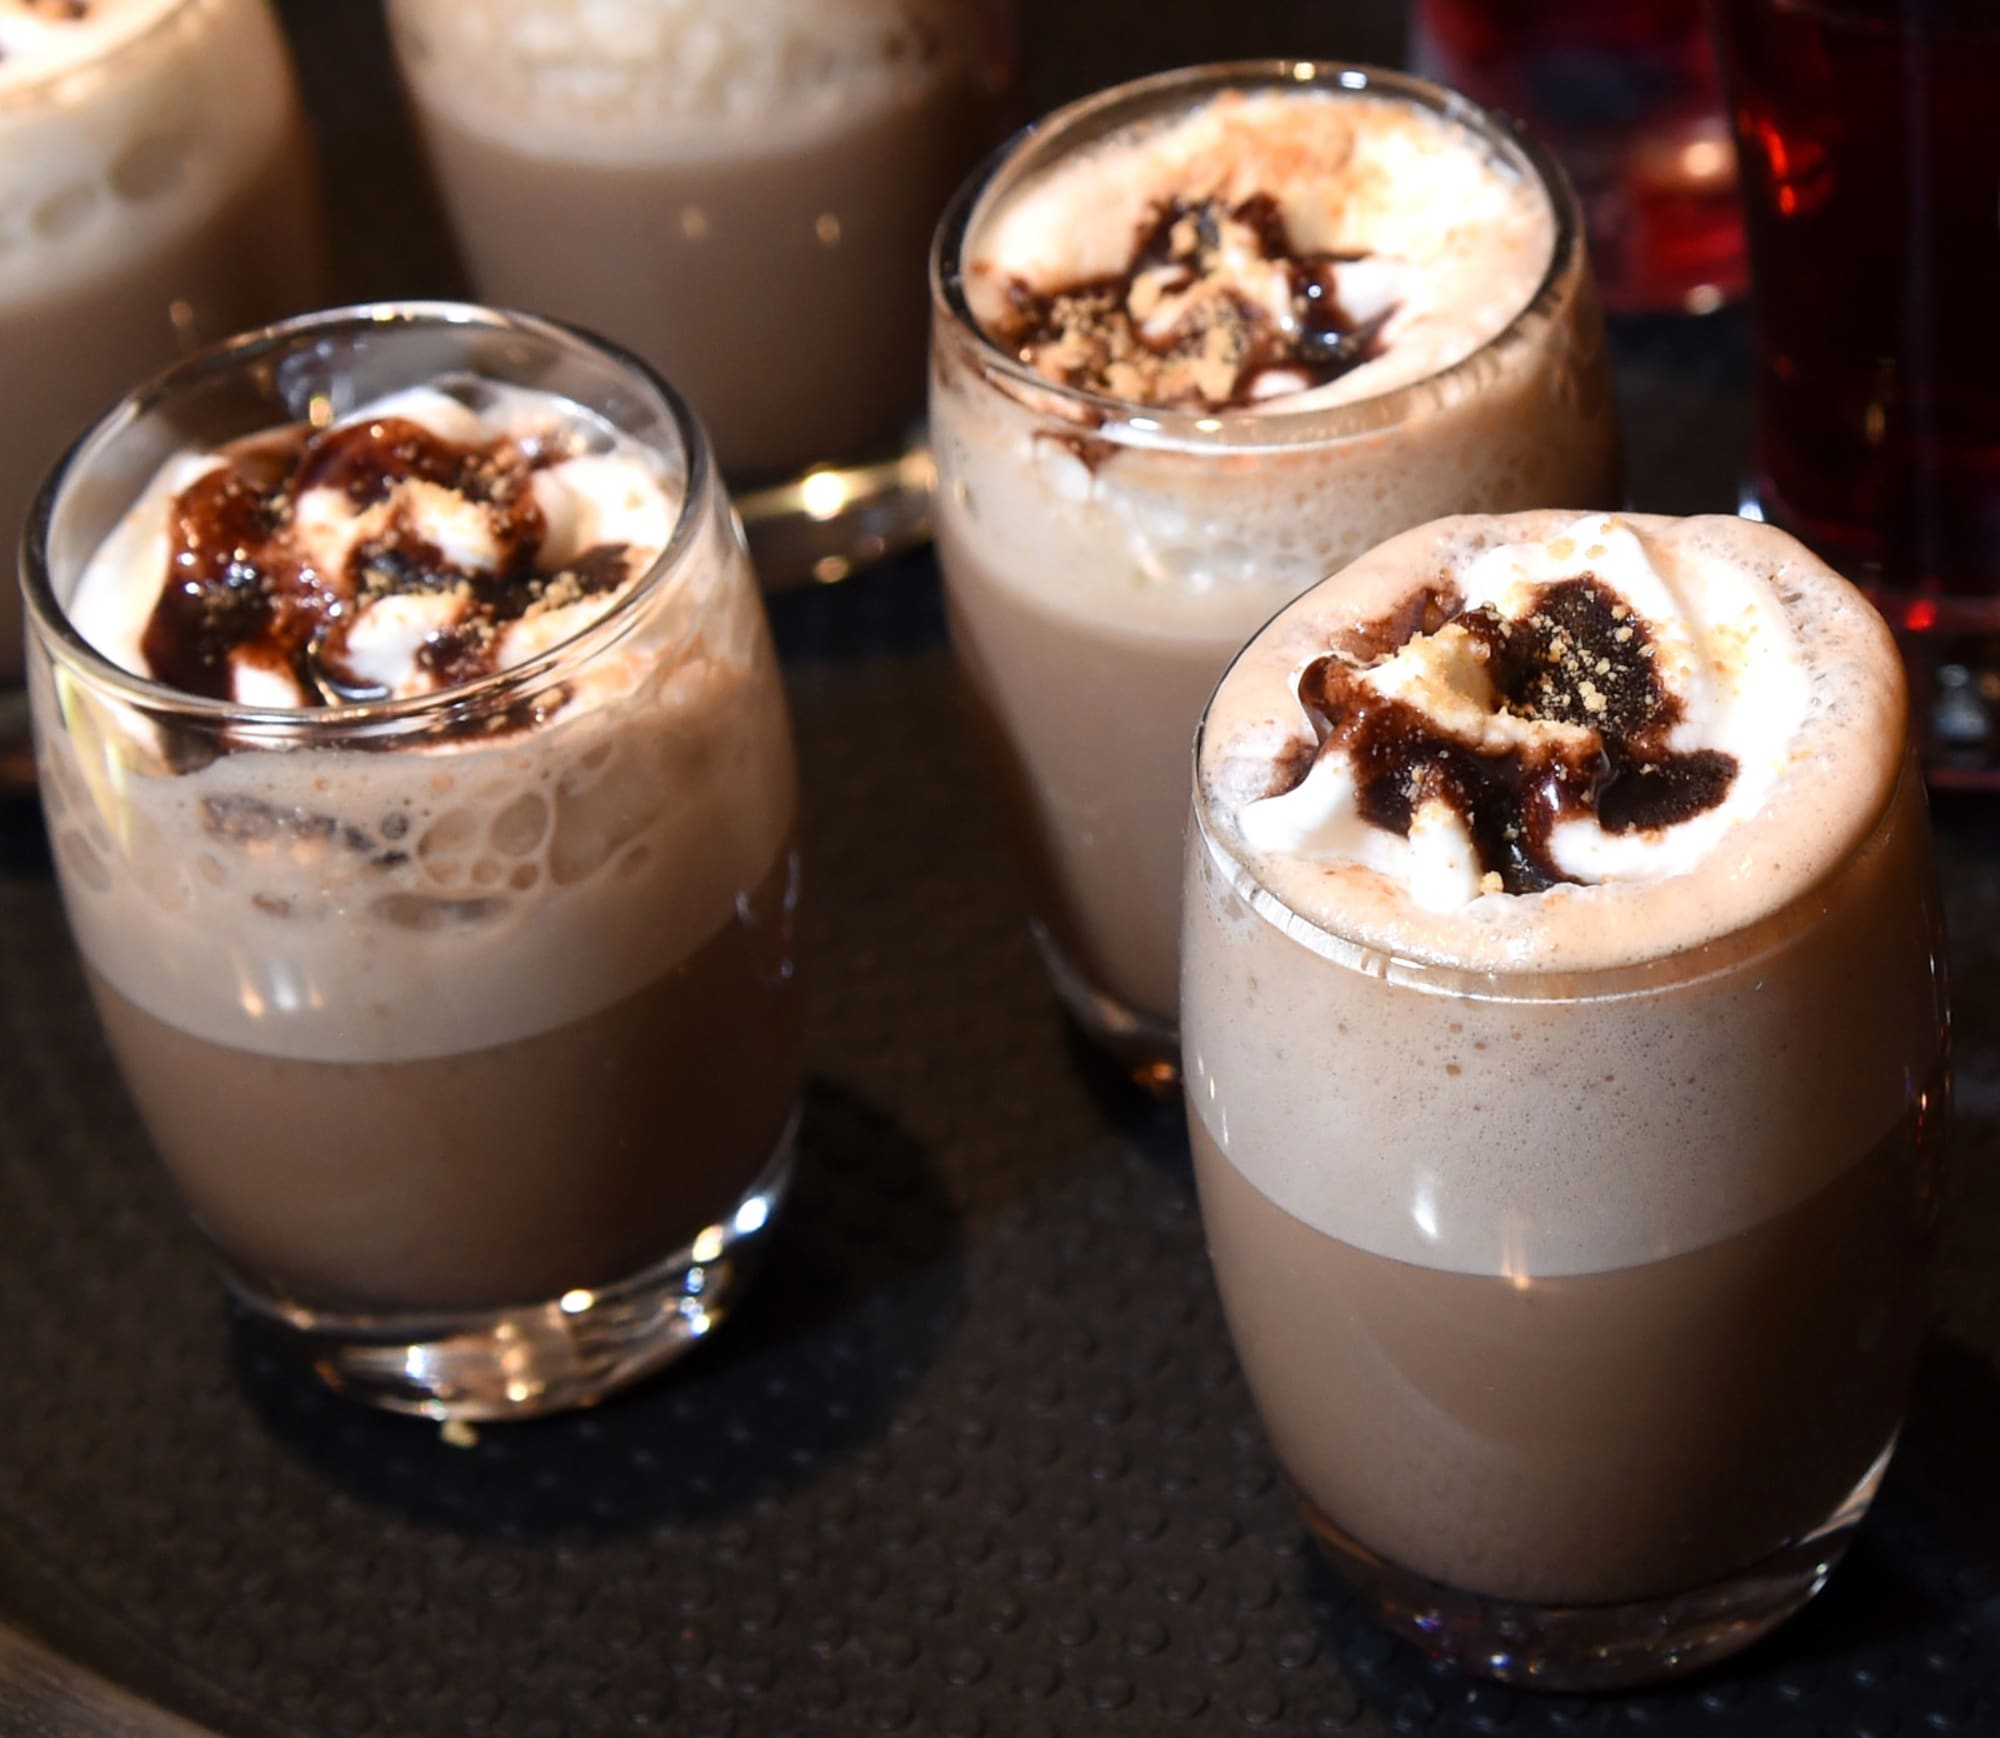 Shake up the traditional campfire treats with these s’mores beverage ideas